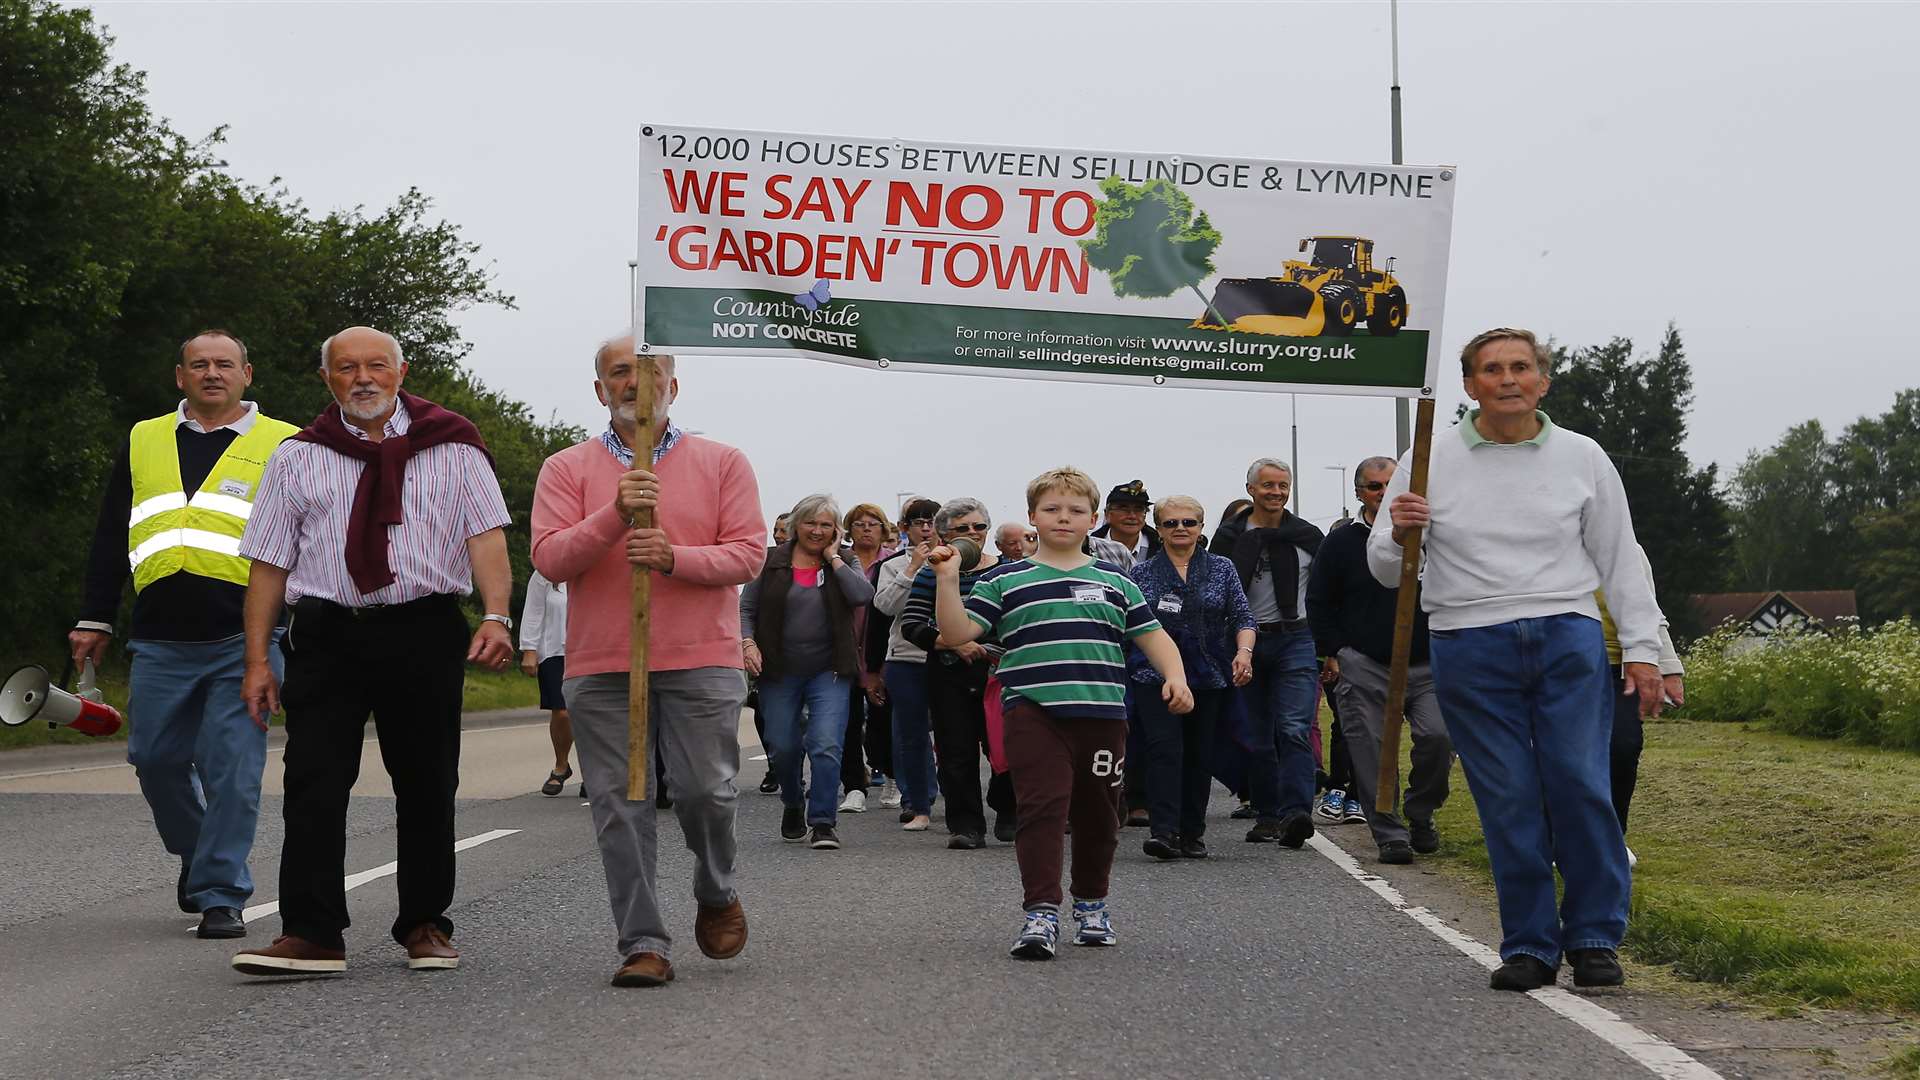 Marchers from Sellindge on Saturday. Pic by Matt Bristow